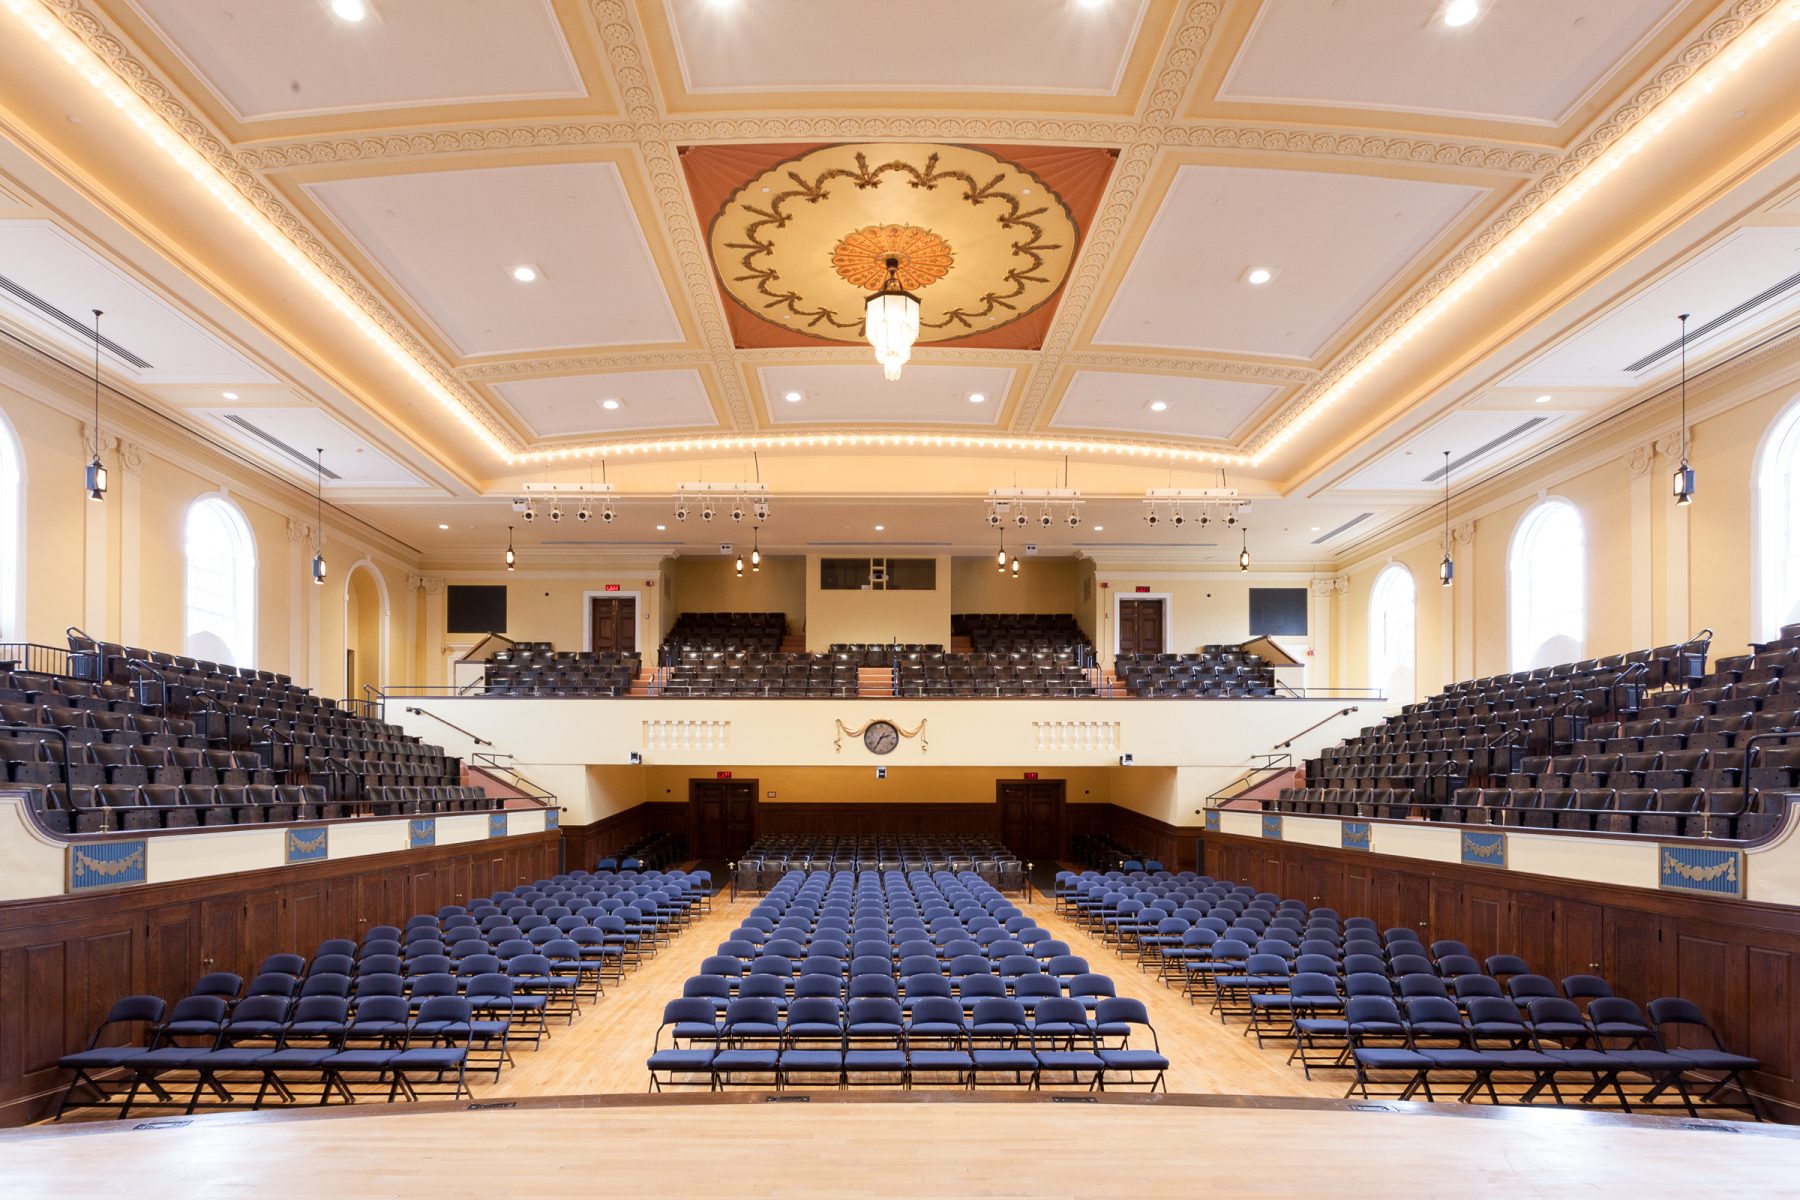 Cary Memorial Hall Interior Seating, view from stage